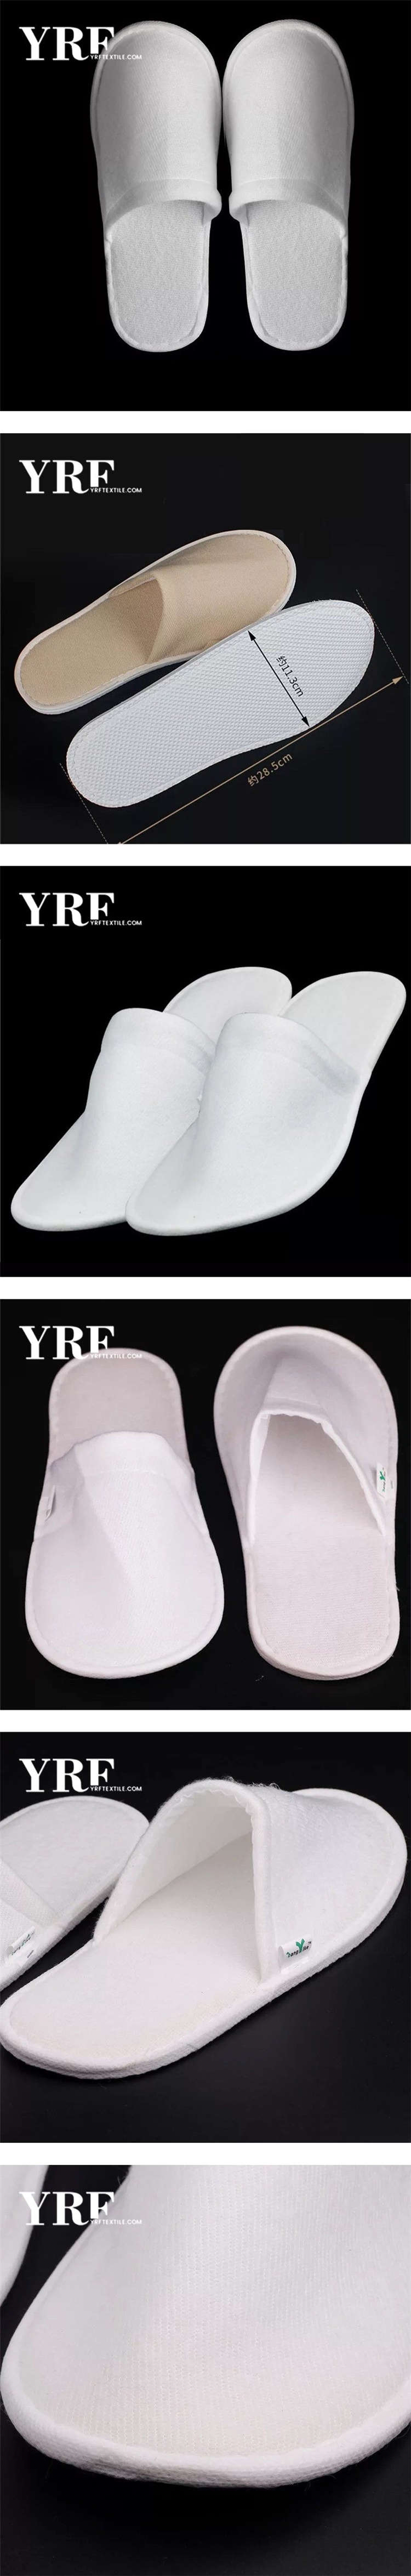 Velour Hotel Slippers With Embroidery Logo